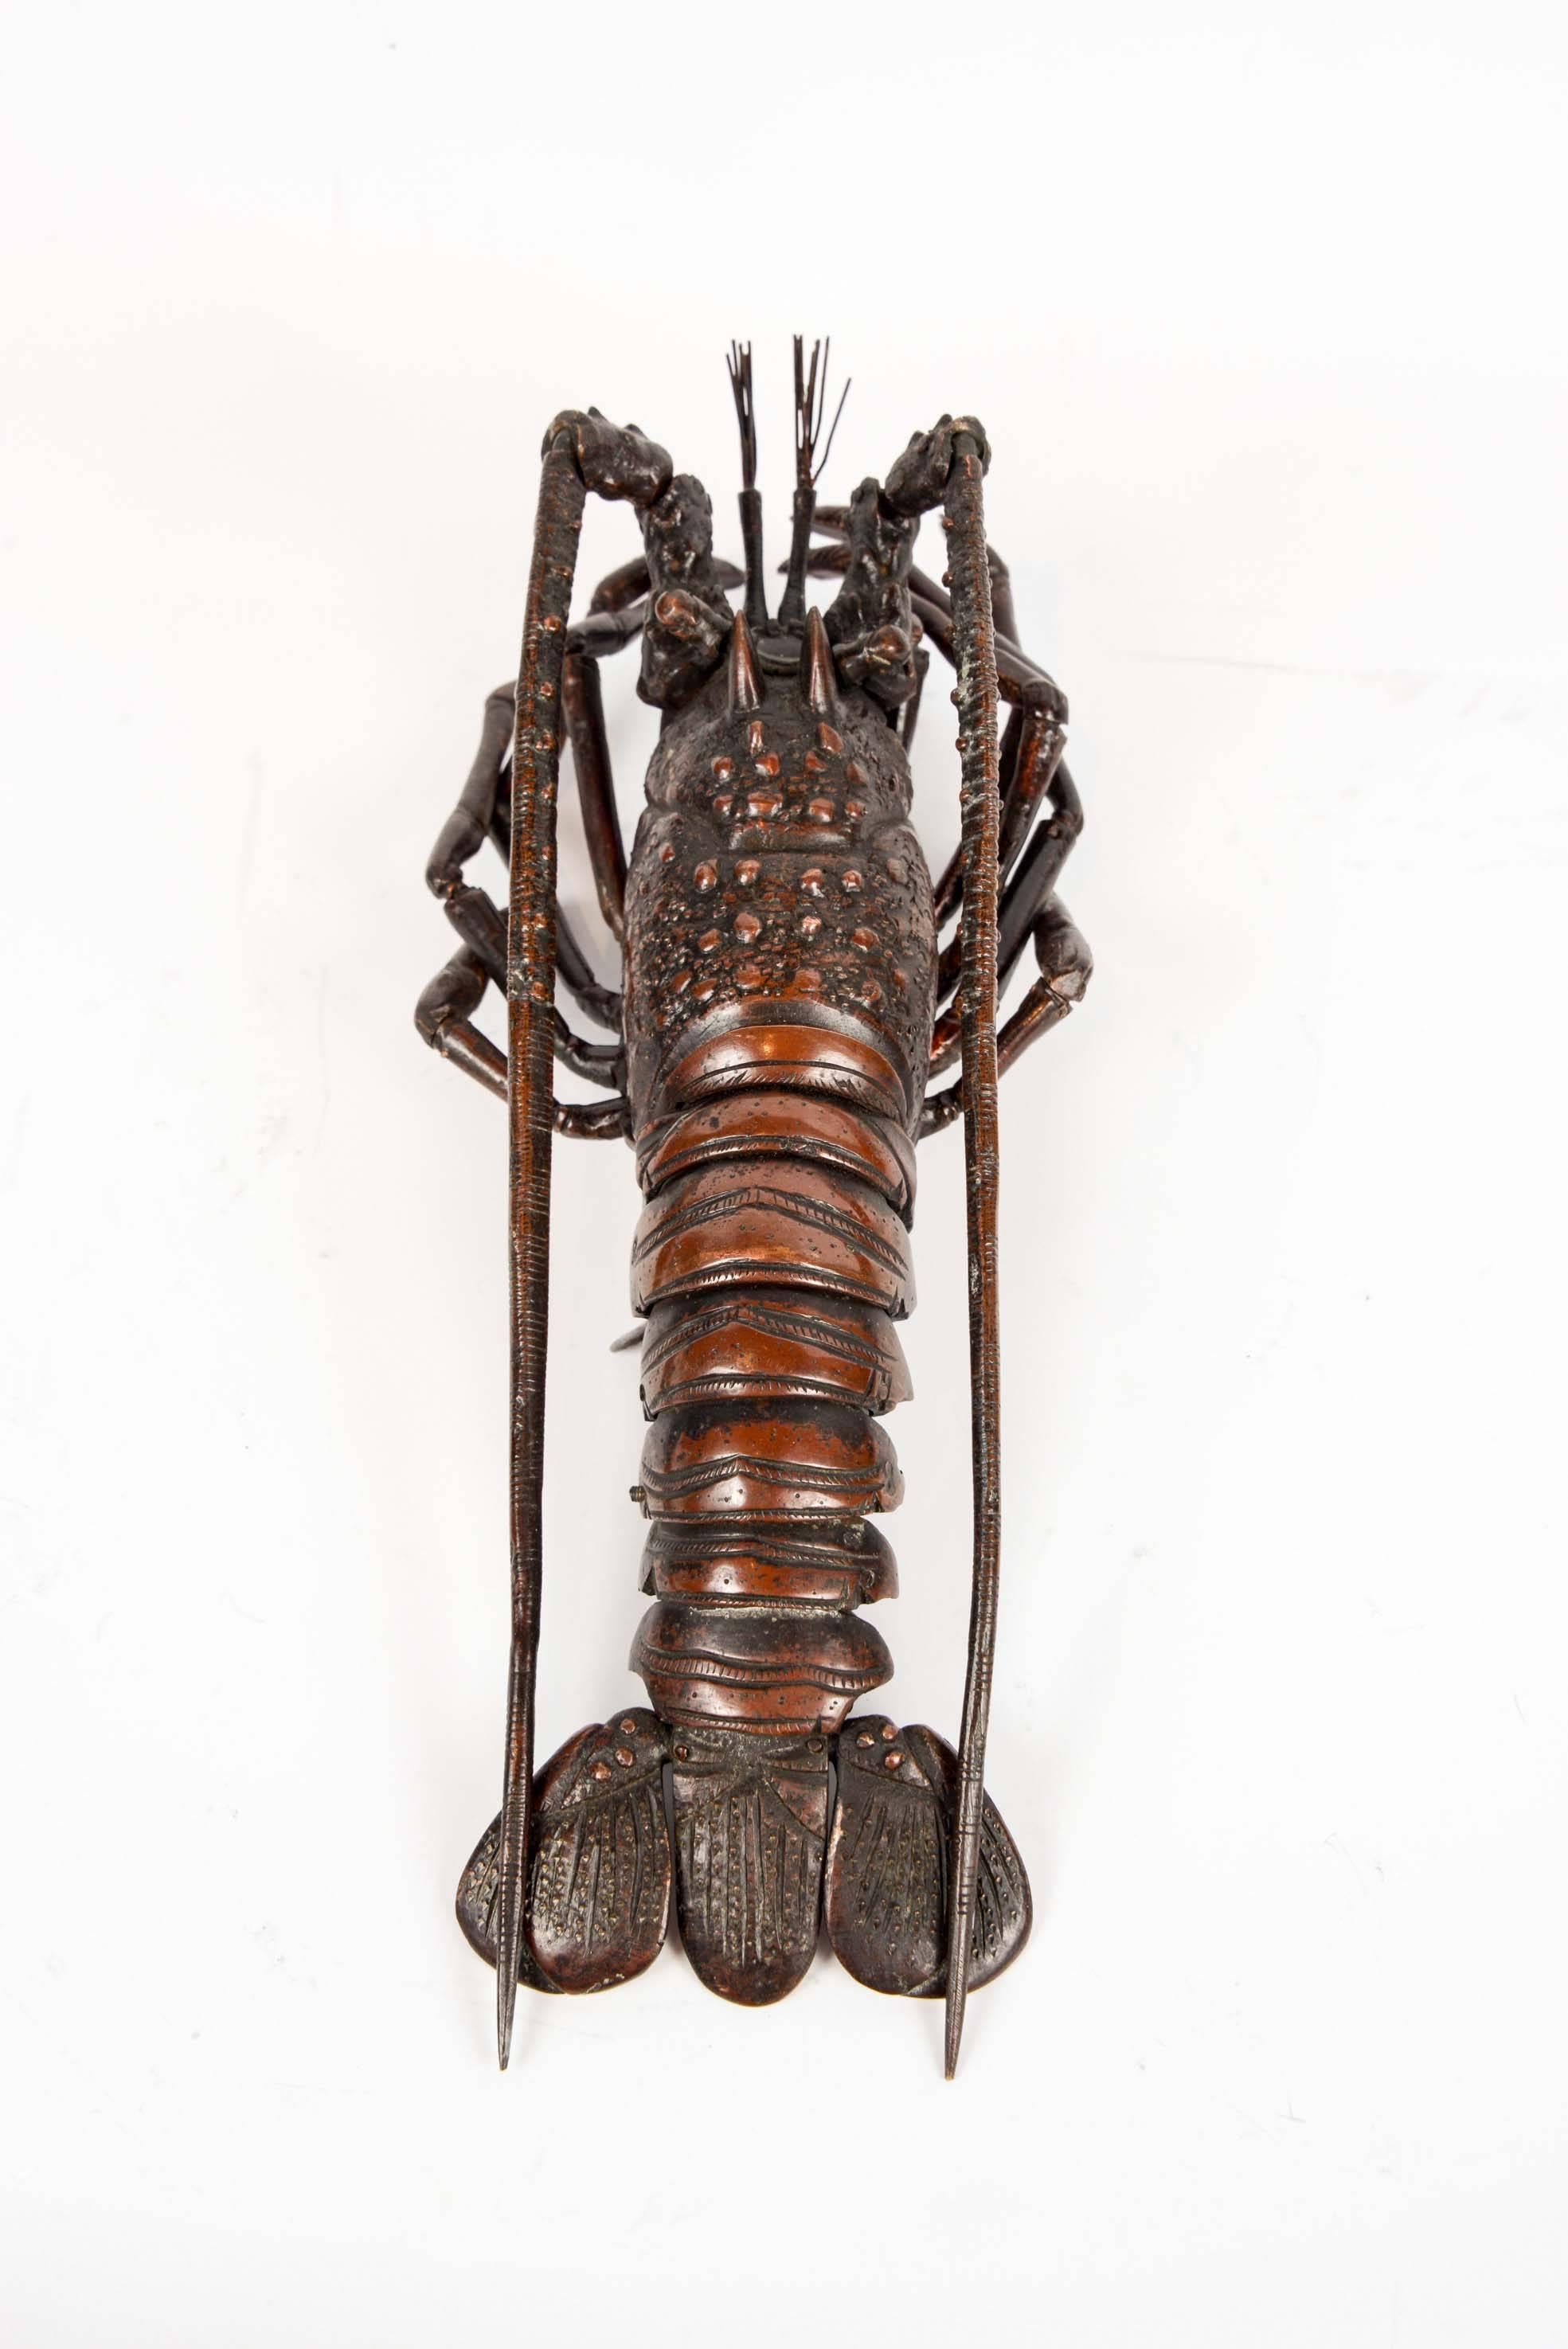 Outstanding fully articulated bronze lobster.
This type of object was made in Japan during the Meiji period. They had to have identical features and size as the represented animal. They are also known under the term 